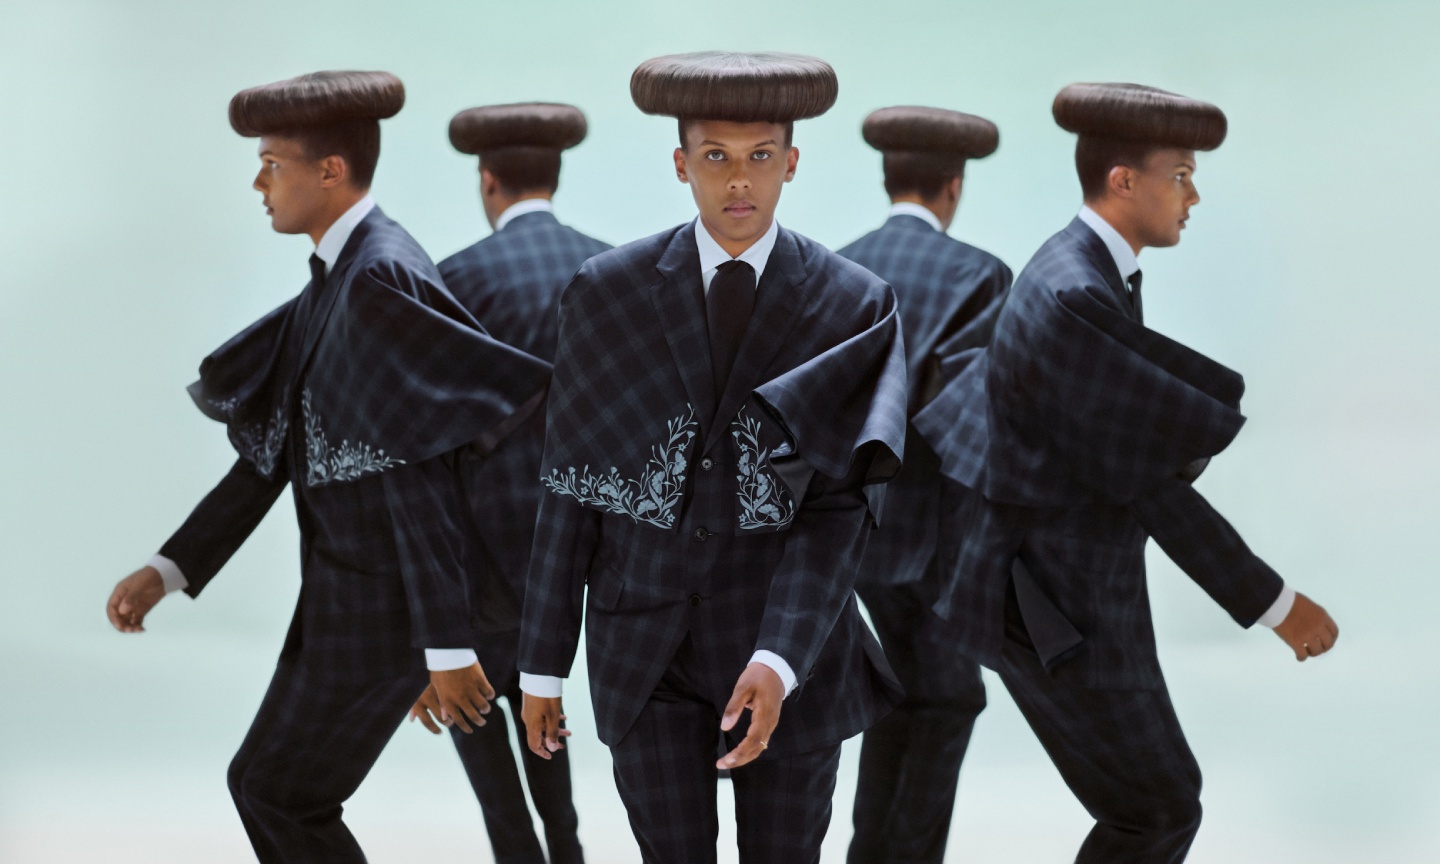 Stromae on 'Multitude' and Returning to Music